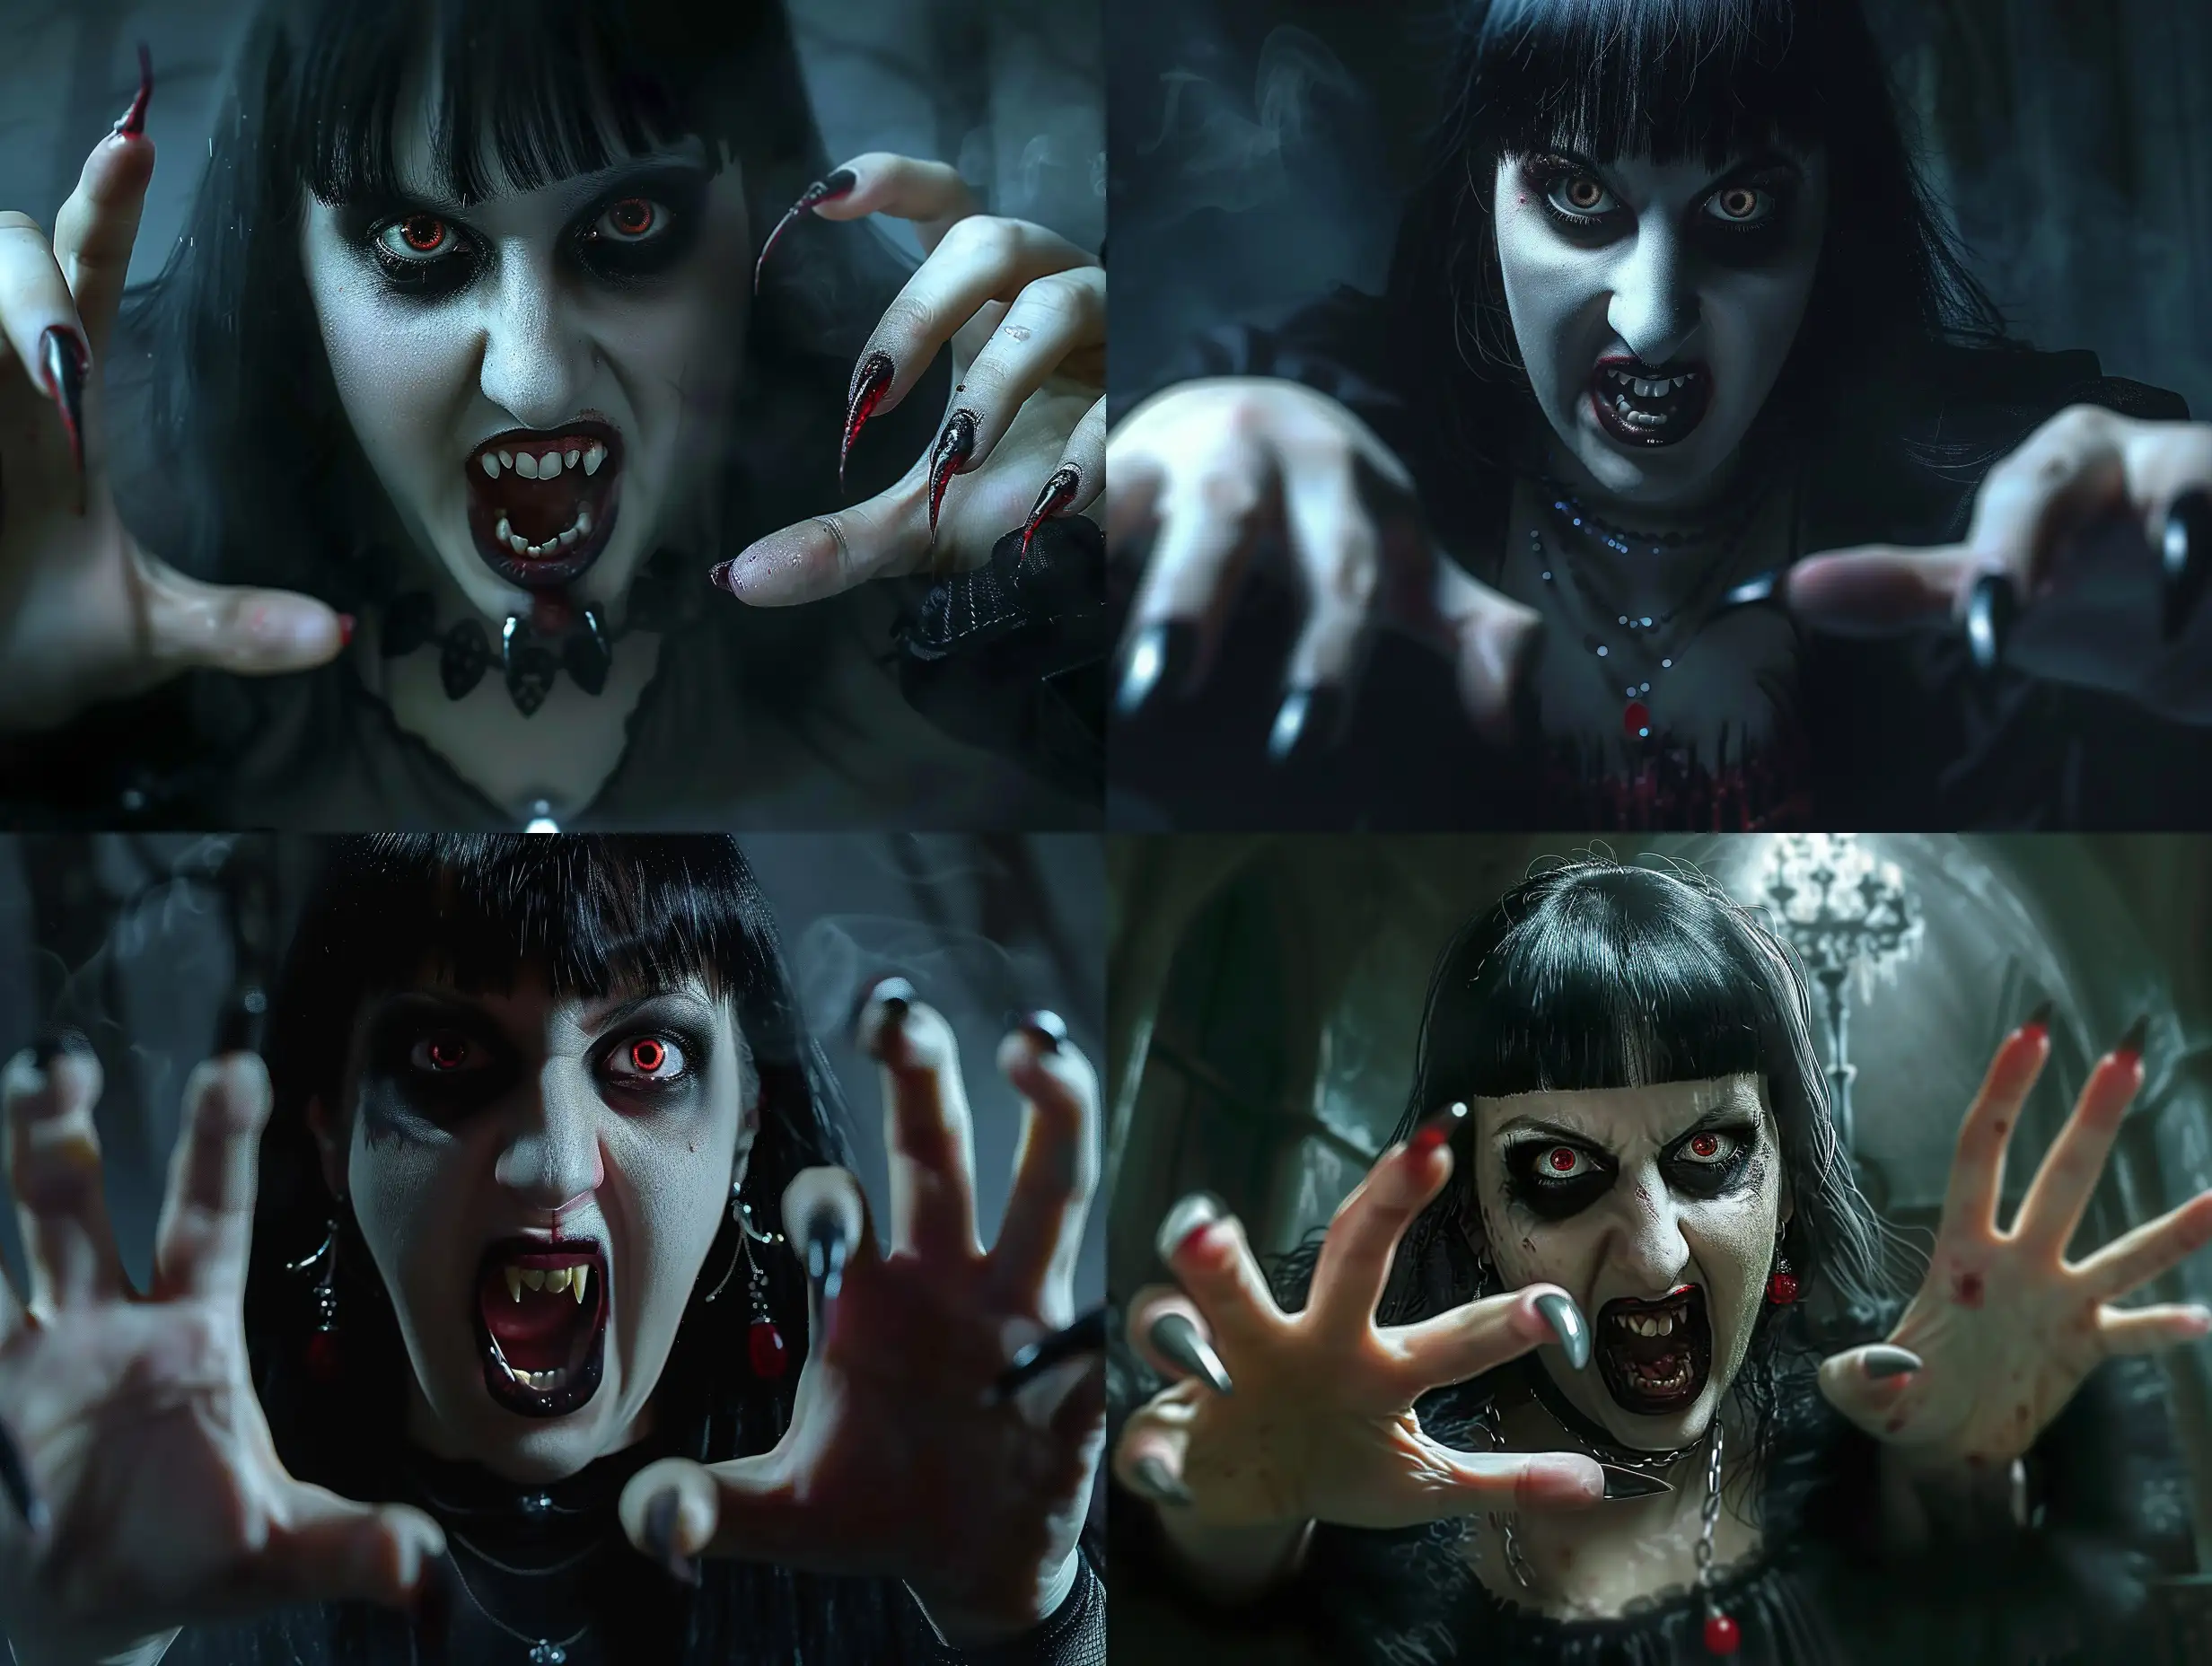 Terrifying-Monstrous-Female-Vampire-with-Predatory-Fangs-and-Curved-Nails-in-Photorealistic-Nightmare-Scene